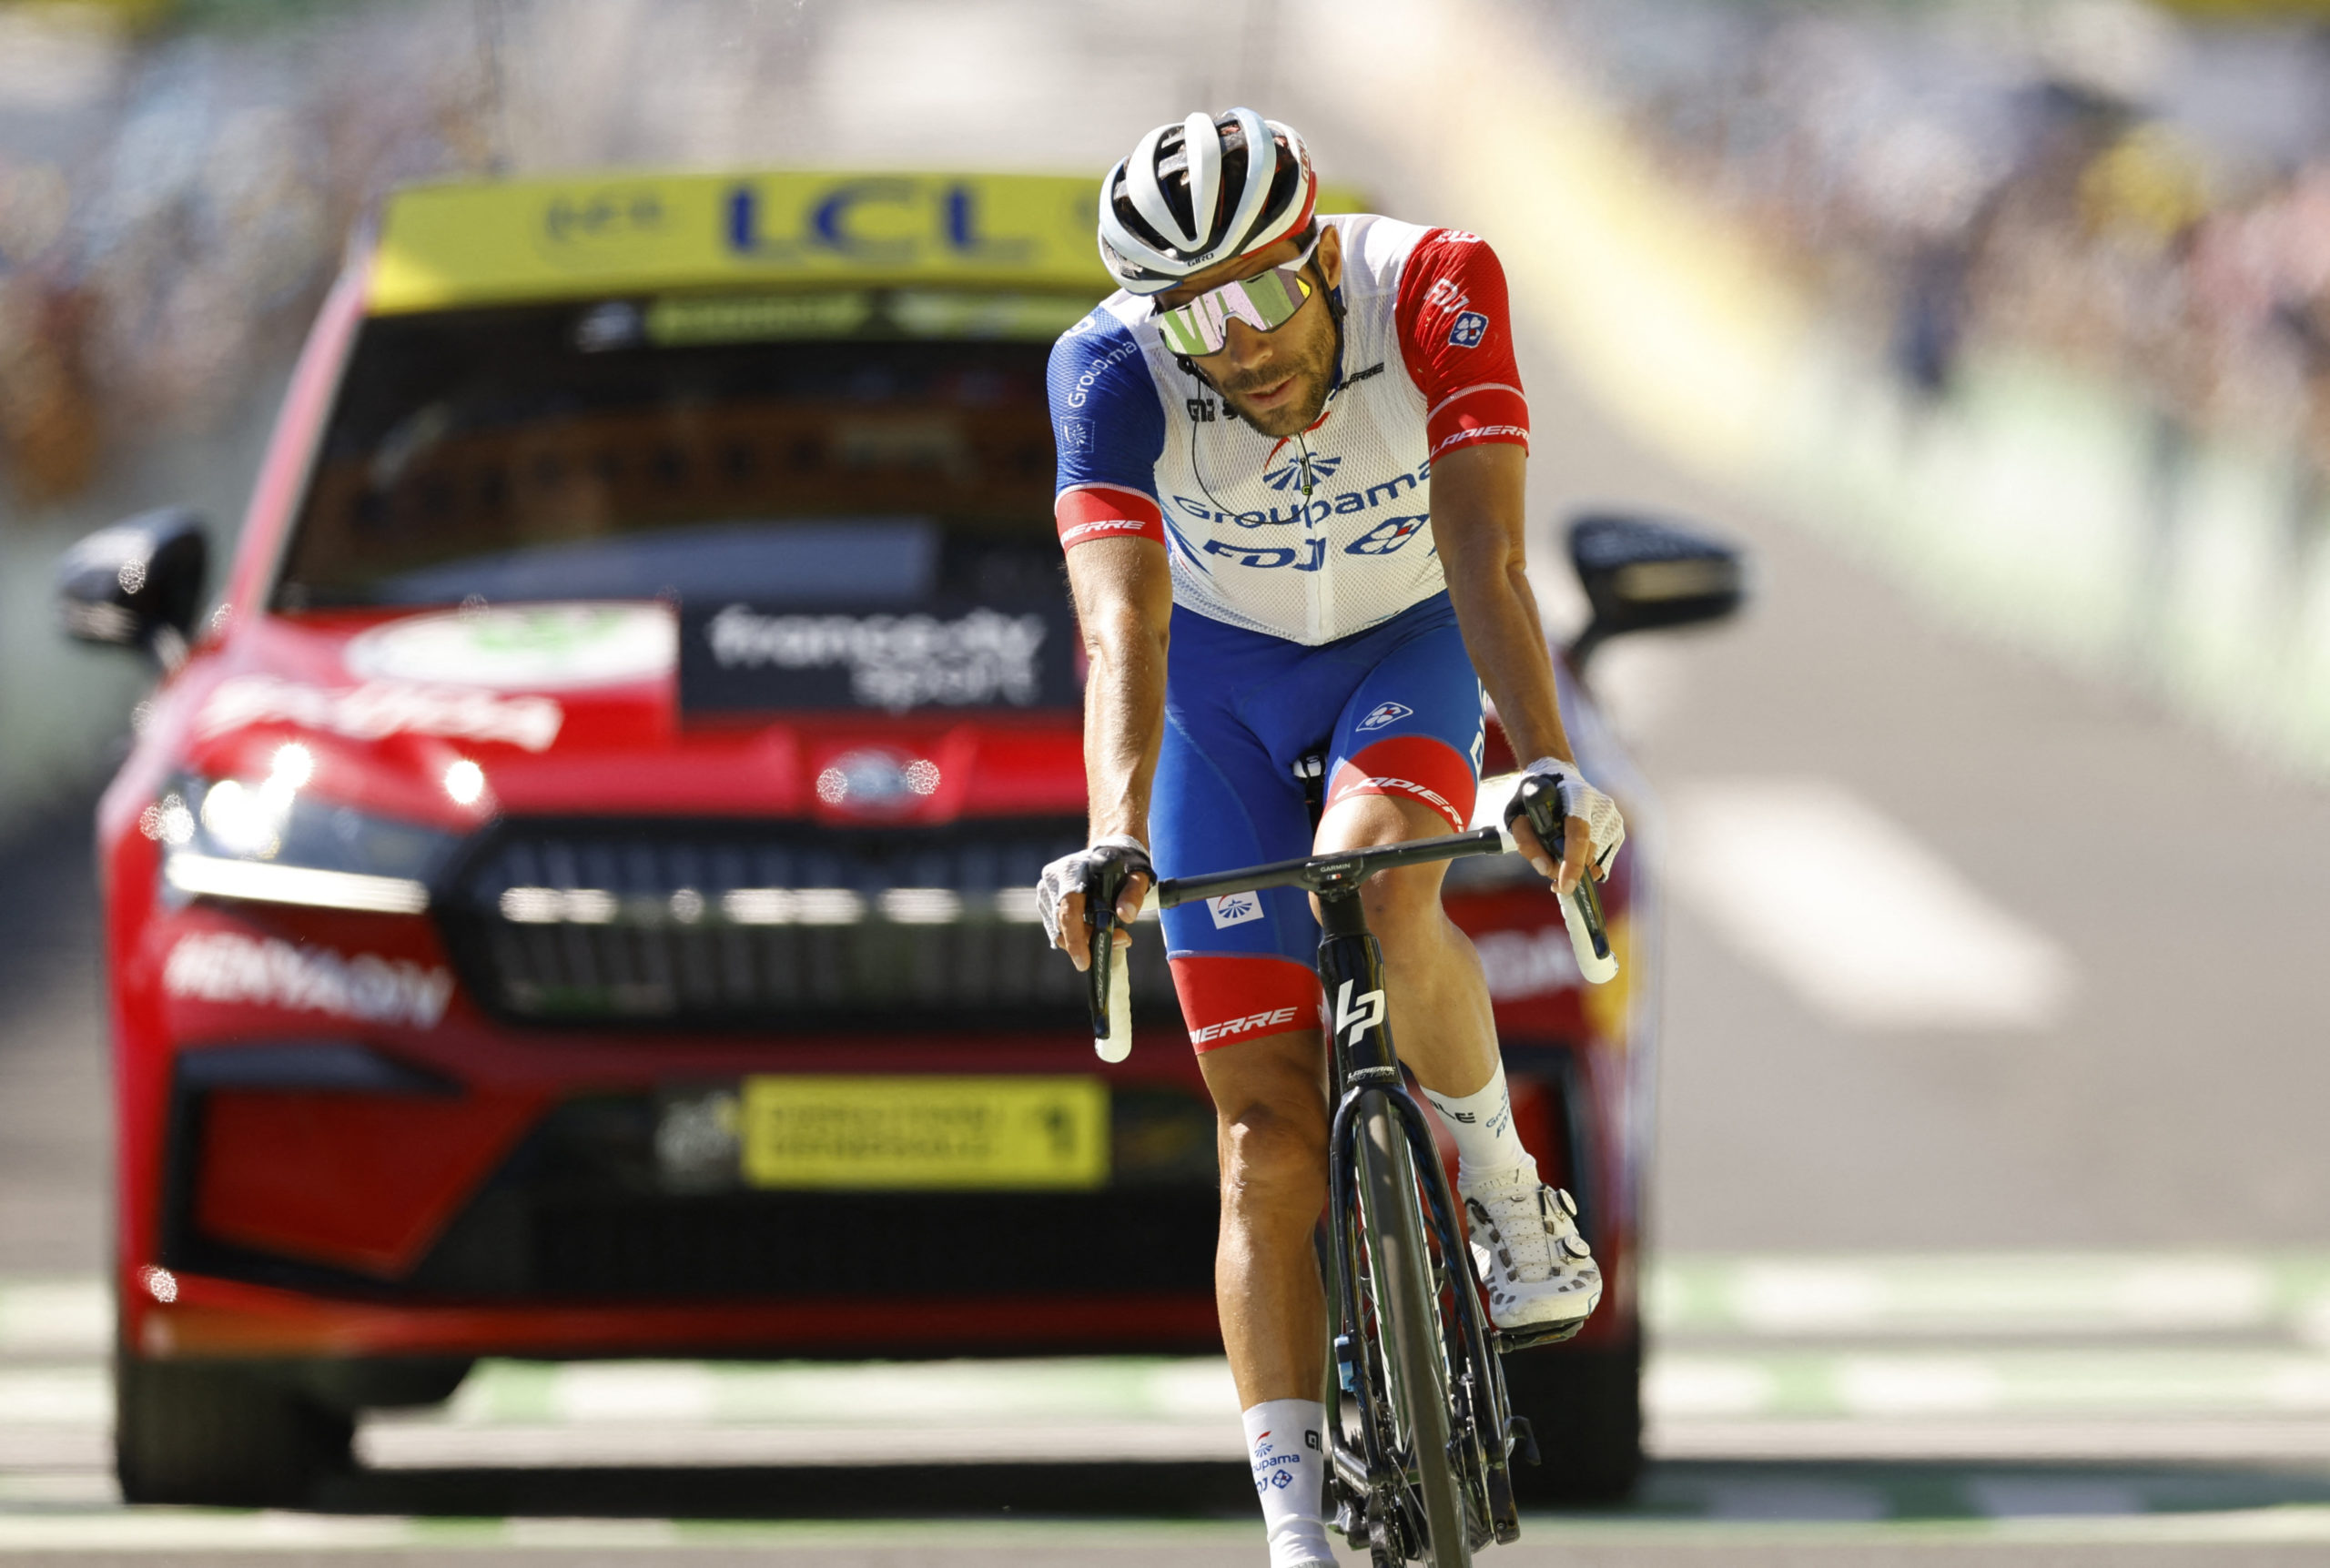 FDJ's Thibaut Pinot crosses the finish line after stage 14 